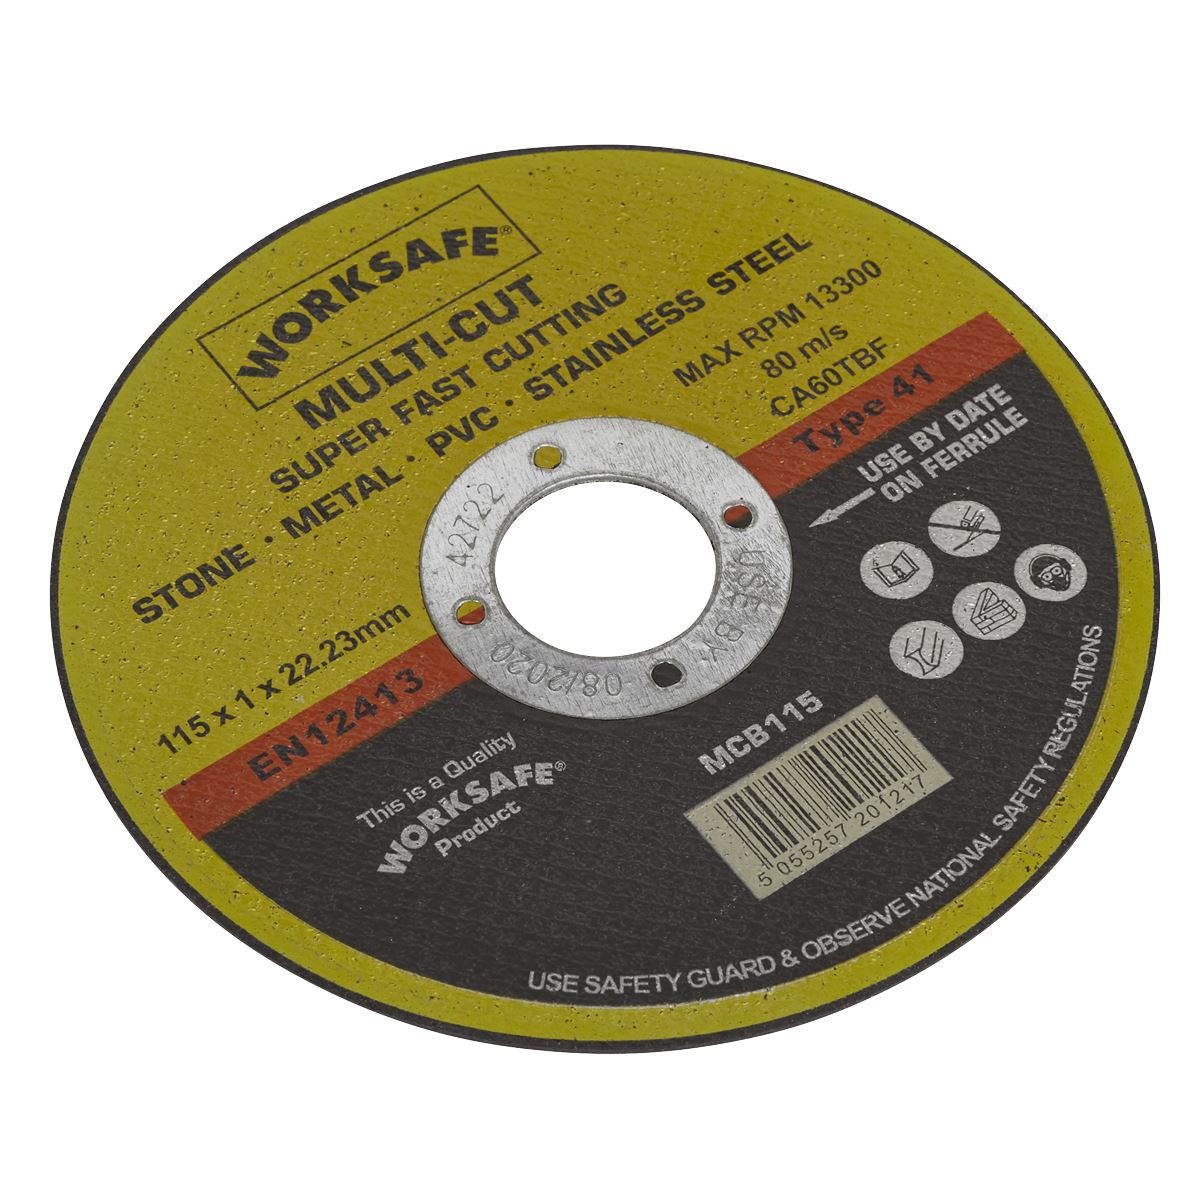 Worksafe by Sealey Multipurpose Cutting Disc Ø115 x 1.6 x Ø22mm Bore - Pack of 50